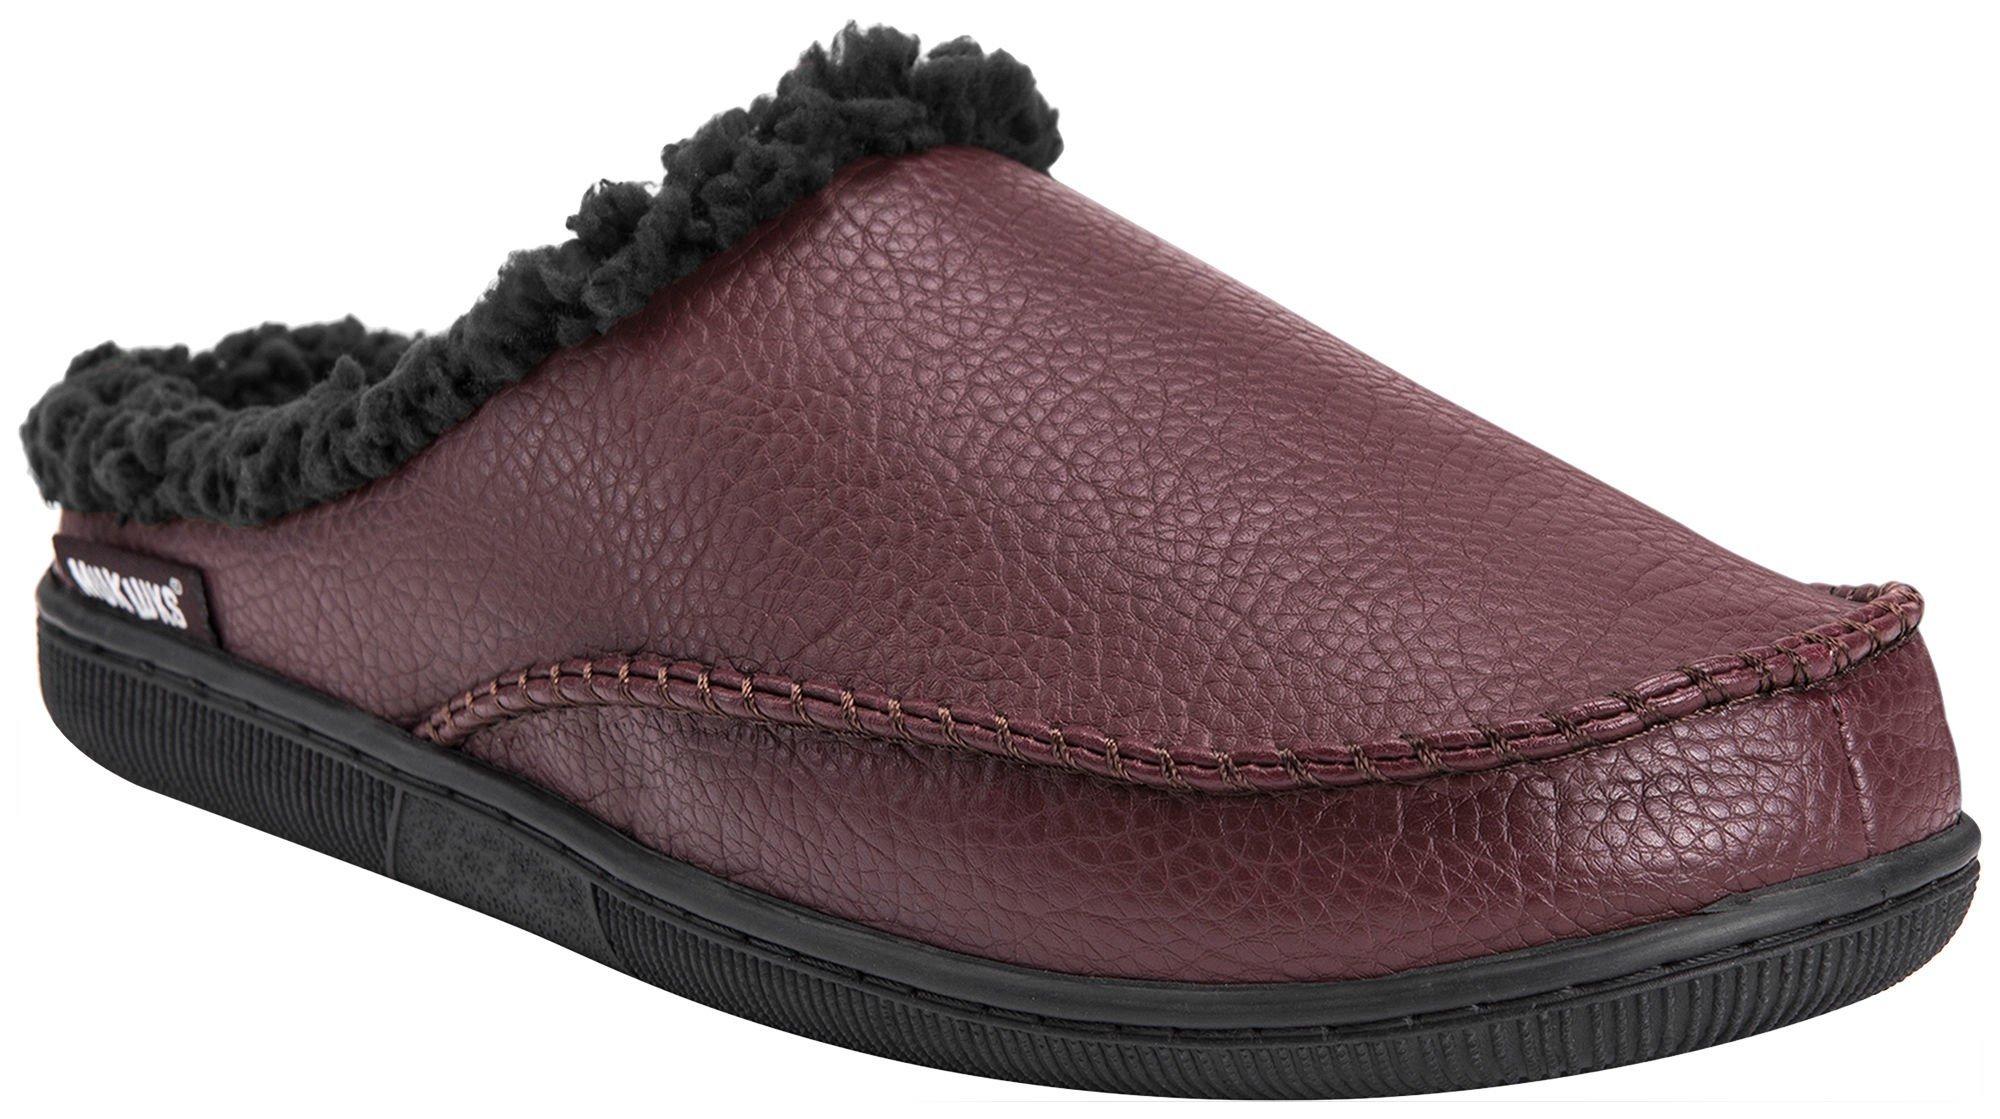 Mens Faux Leather Clog Slippers